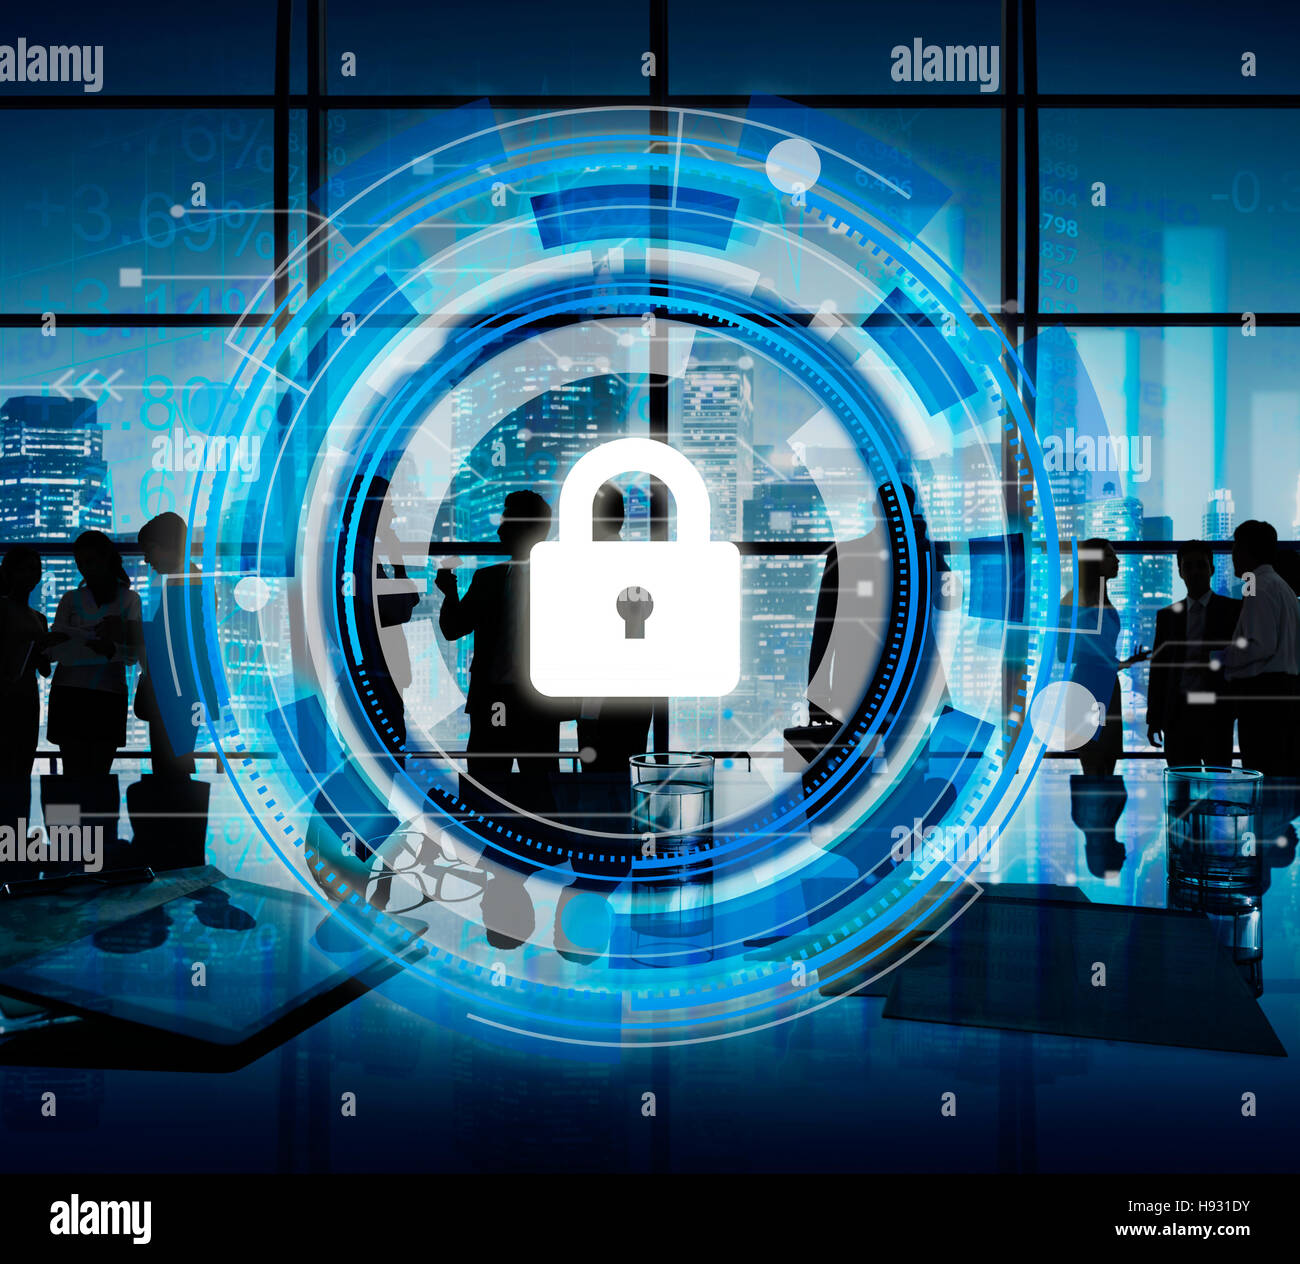 Business Corporate Protection Safety Security Concept Stock Photo